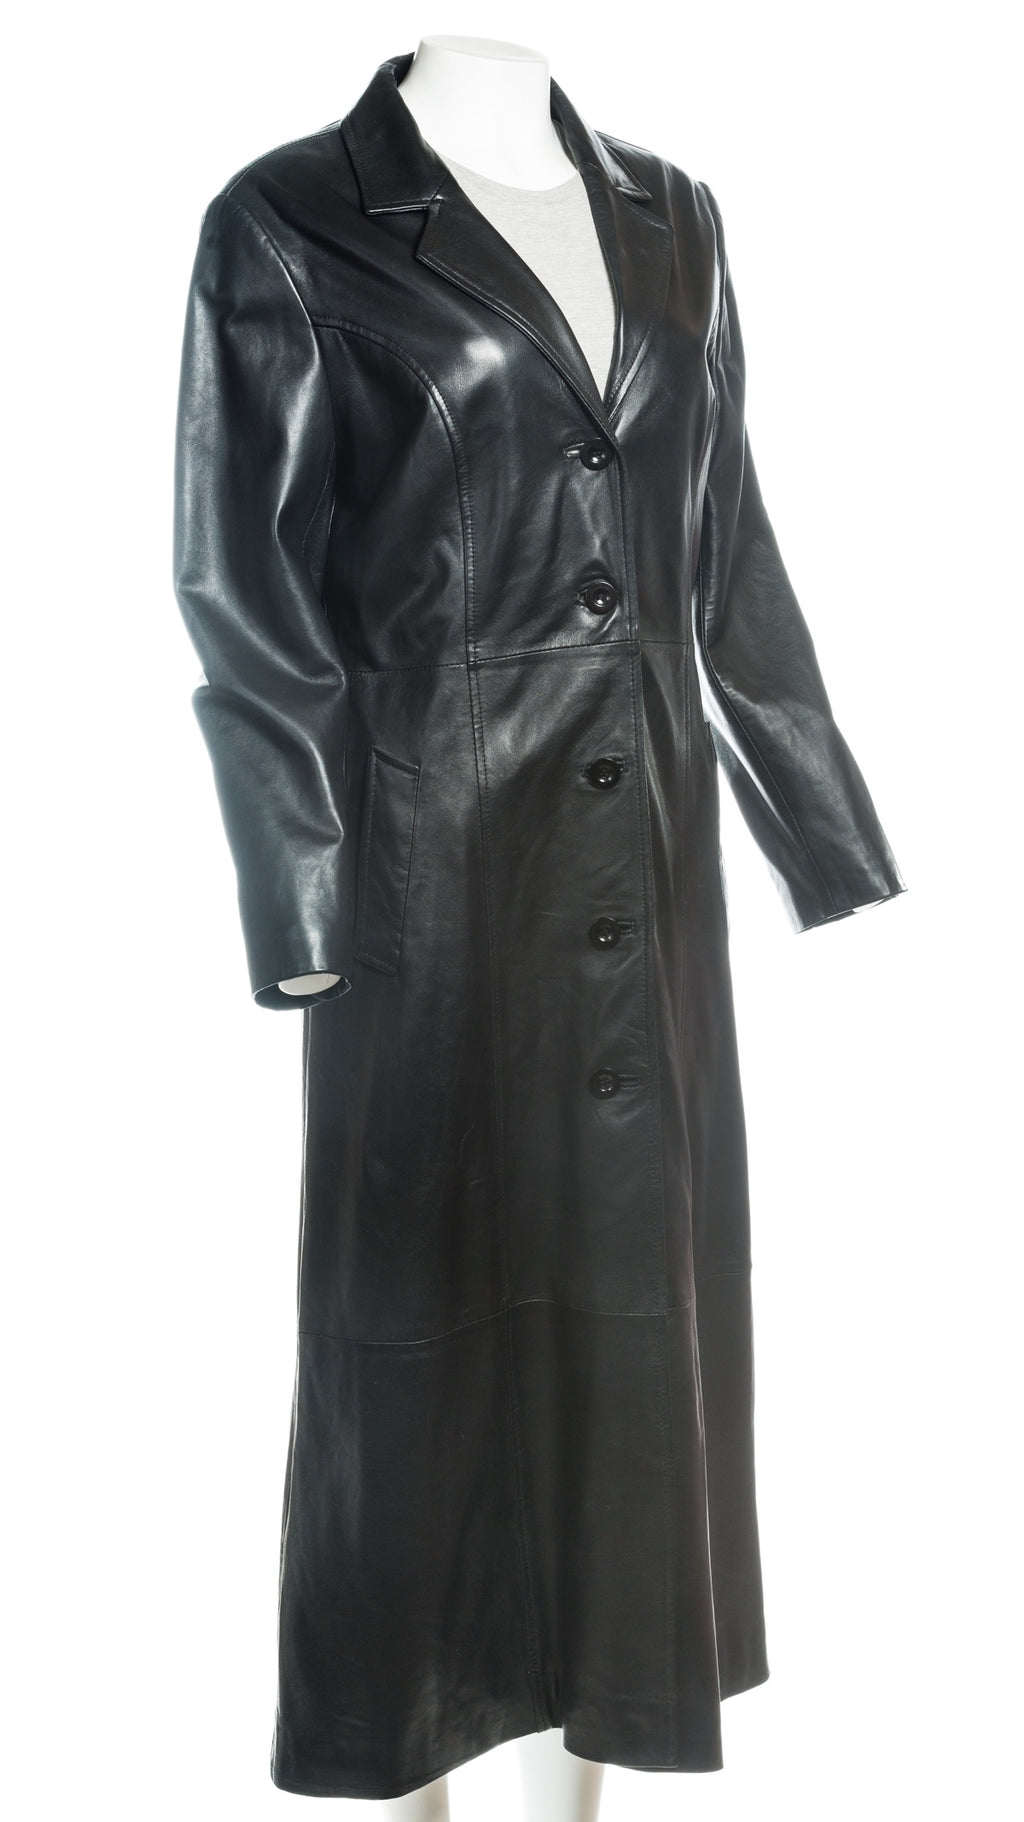 Ladies Black Full Length Buttoned Leather Coat: Gina